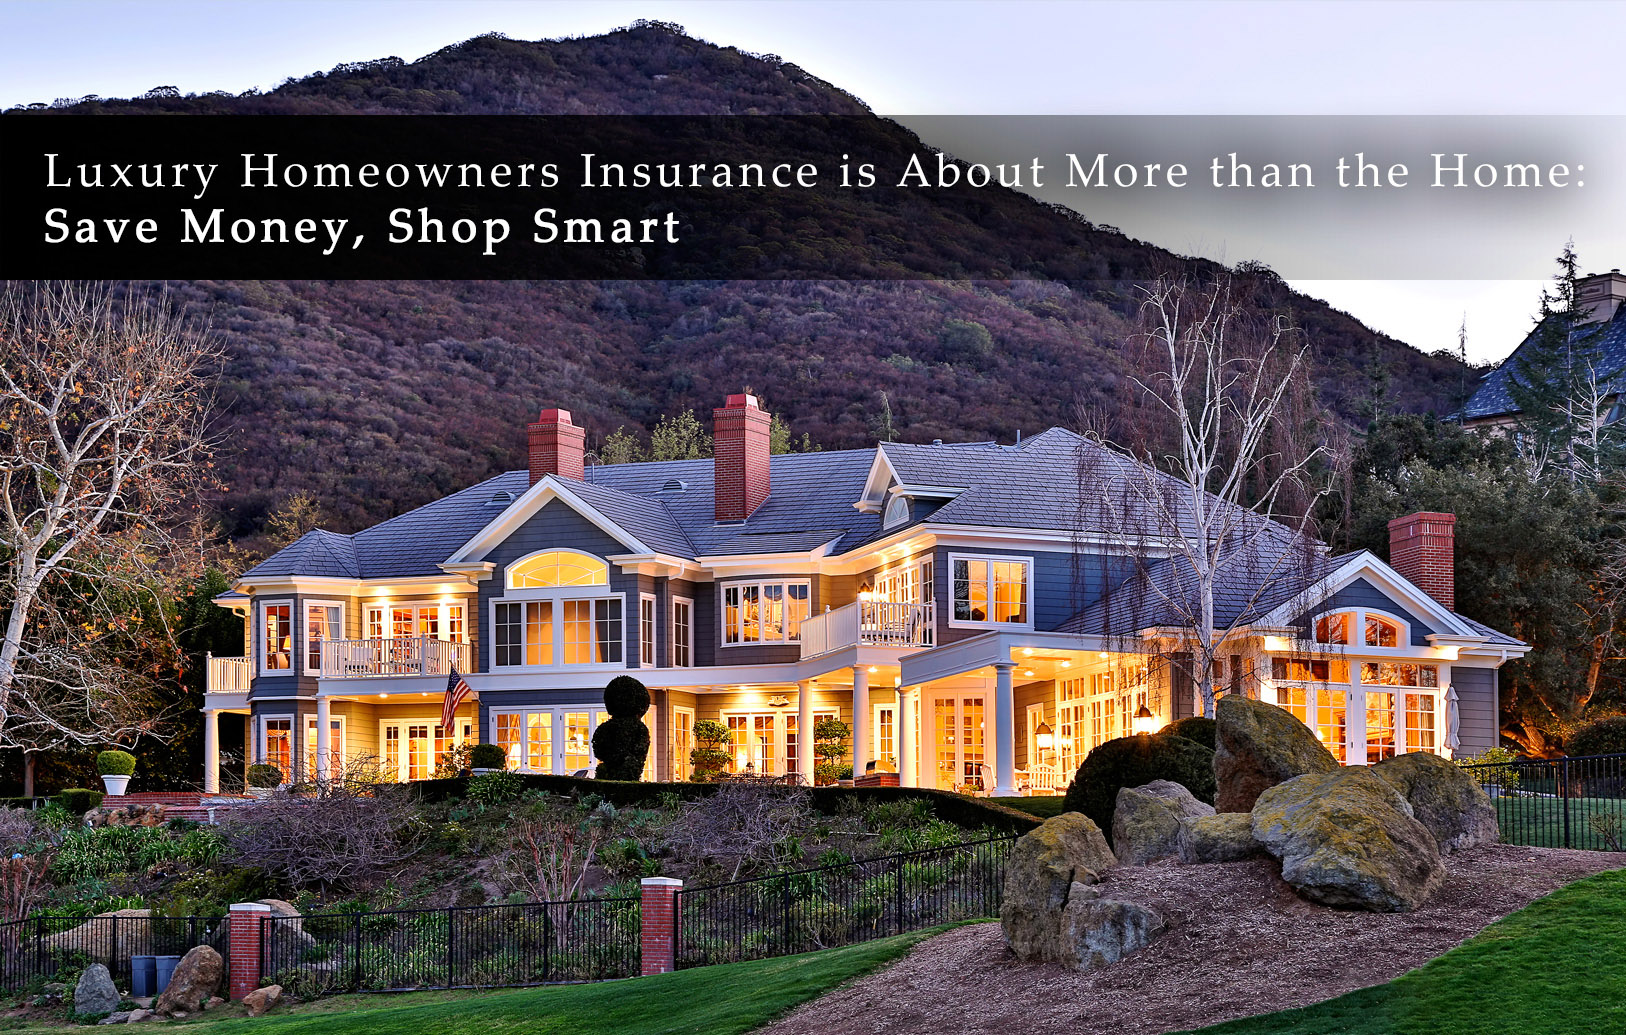 Luxury Homeowners Insurance is About More than the Home - Save Money, Shop Smart